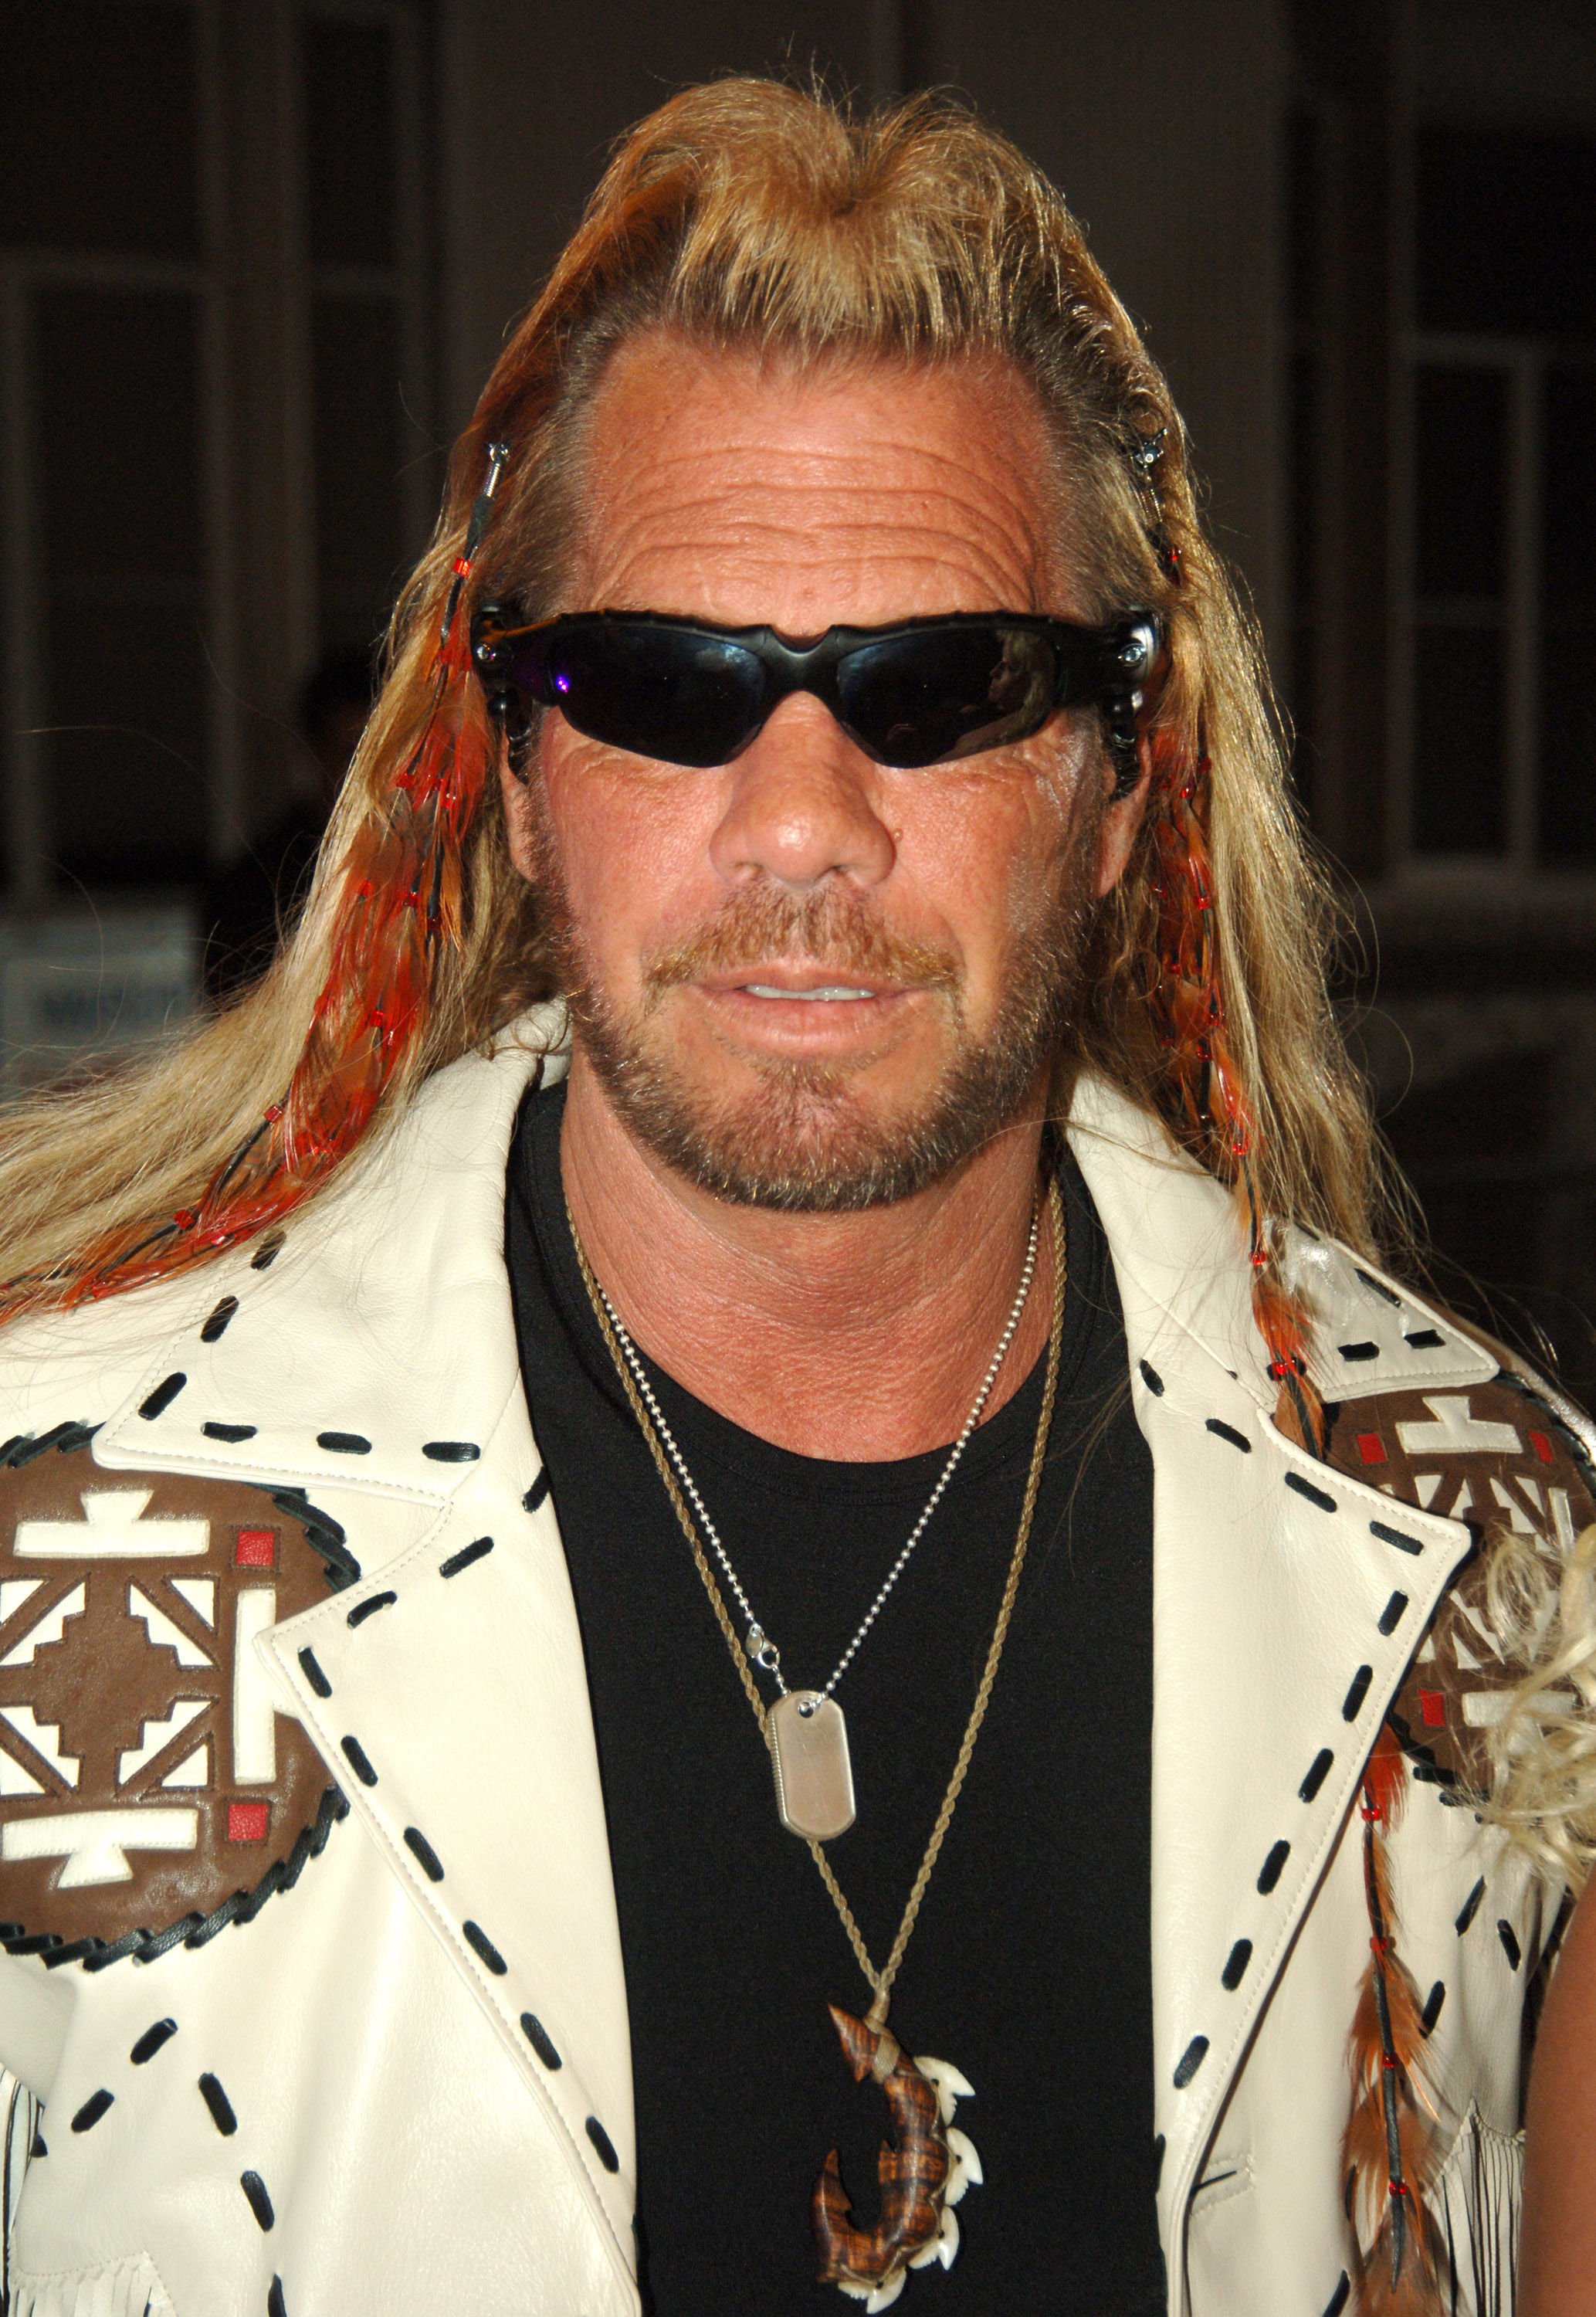 Duane Dog Chapman at the red carpet of "VH1 Big in '05" at Sony Studios in Los Angeles, California | Source: Getty Images